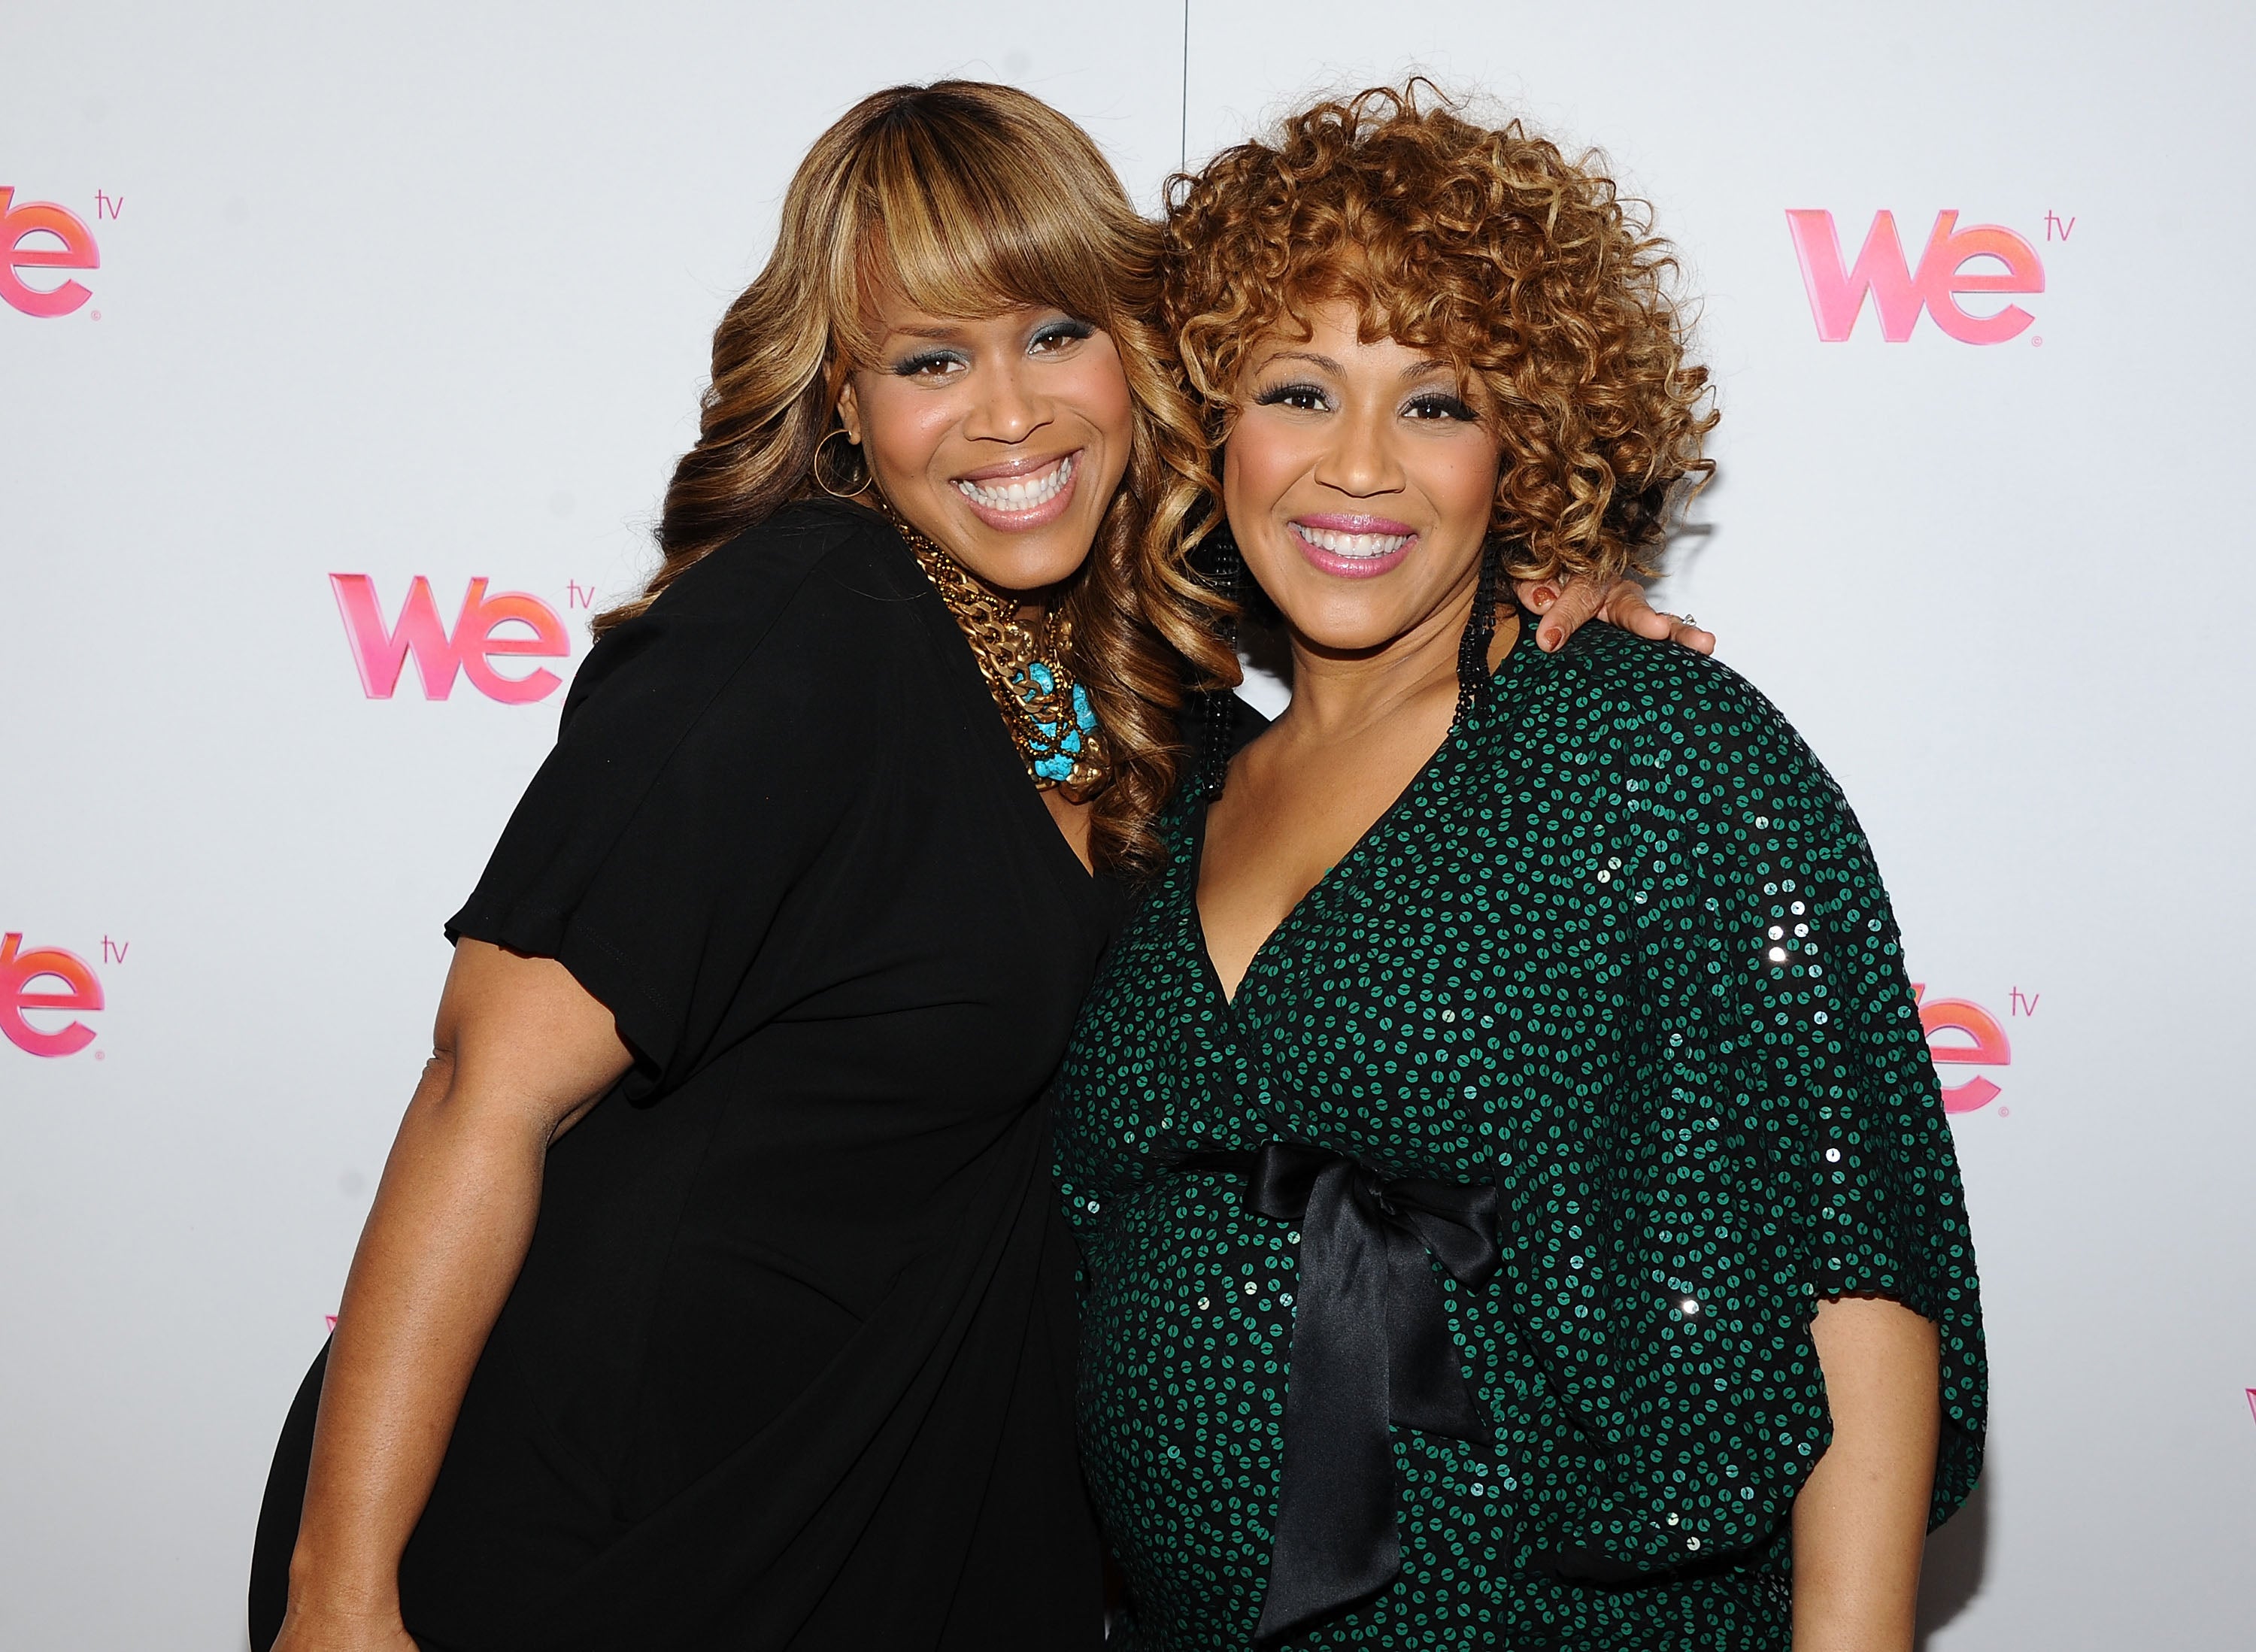 Walk the Walk: Mary Mary on Never Giving Up